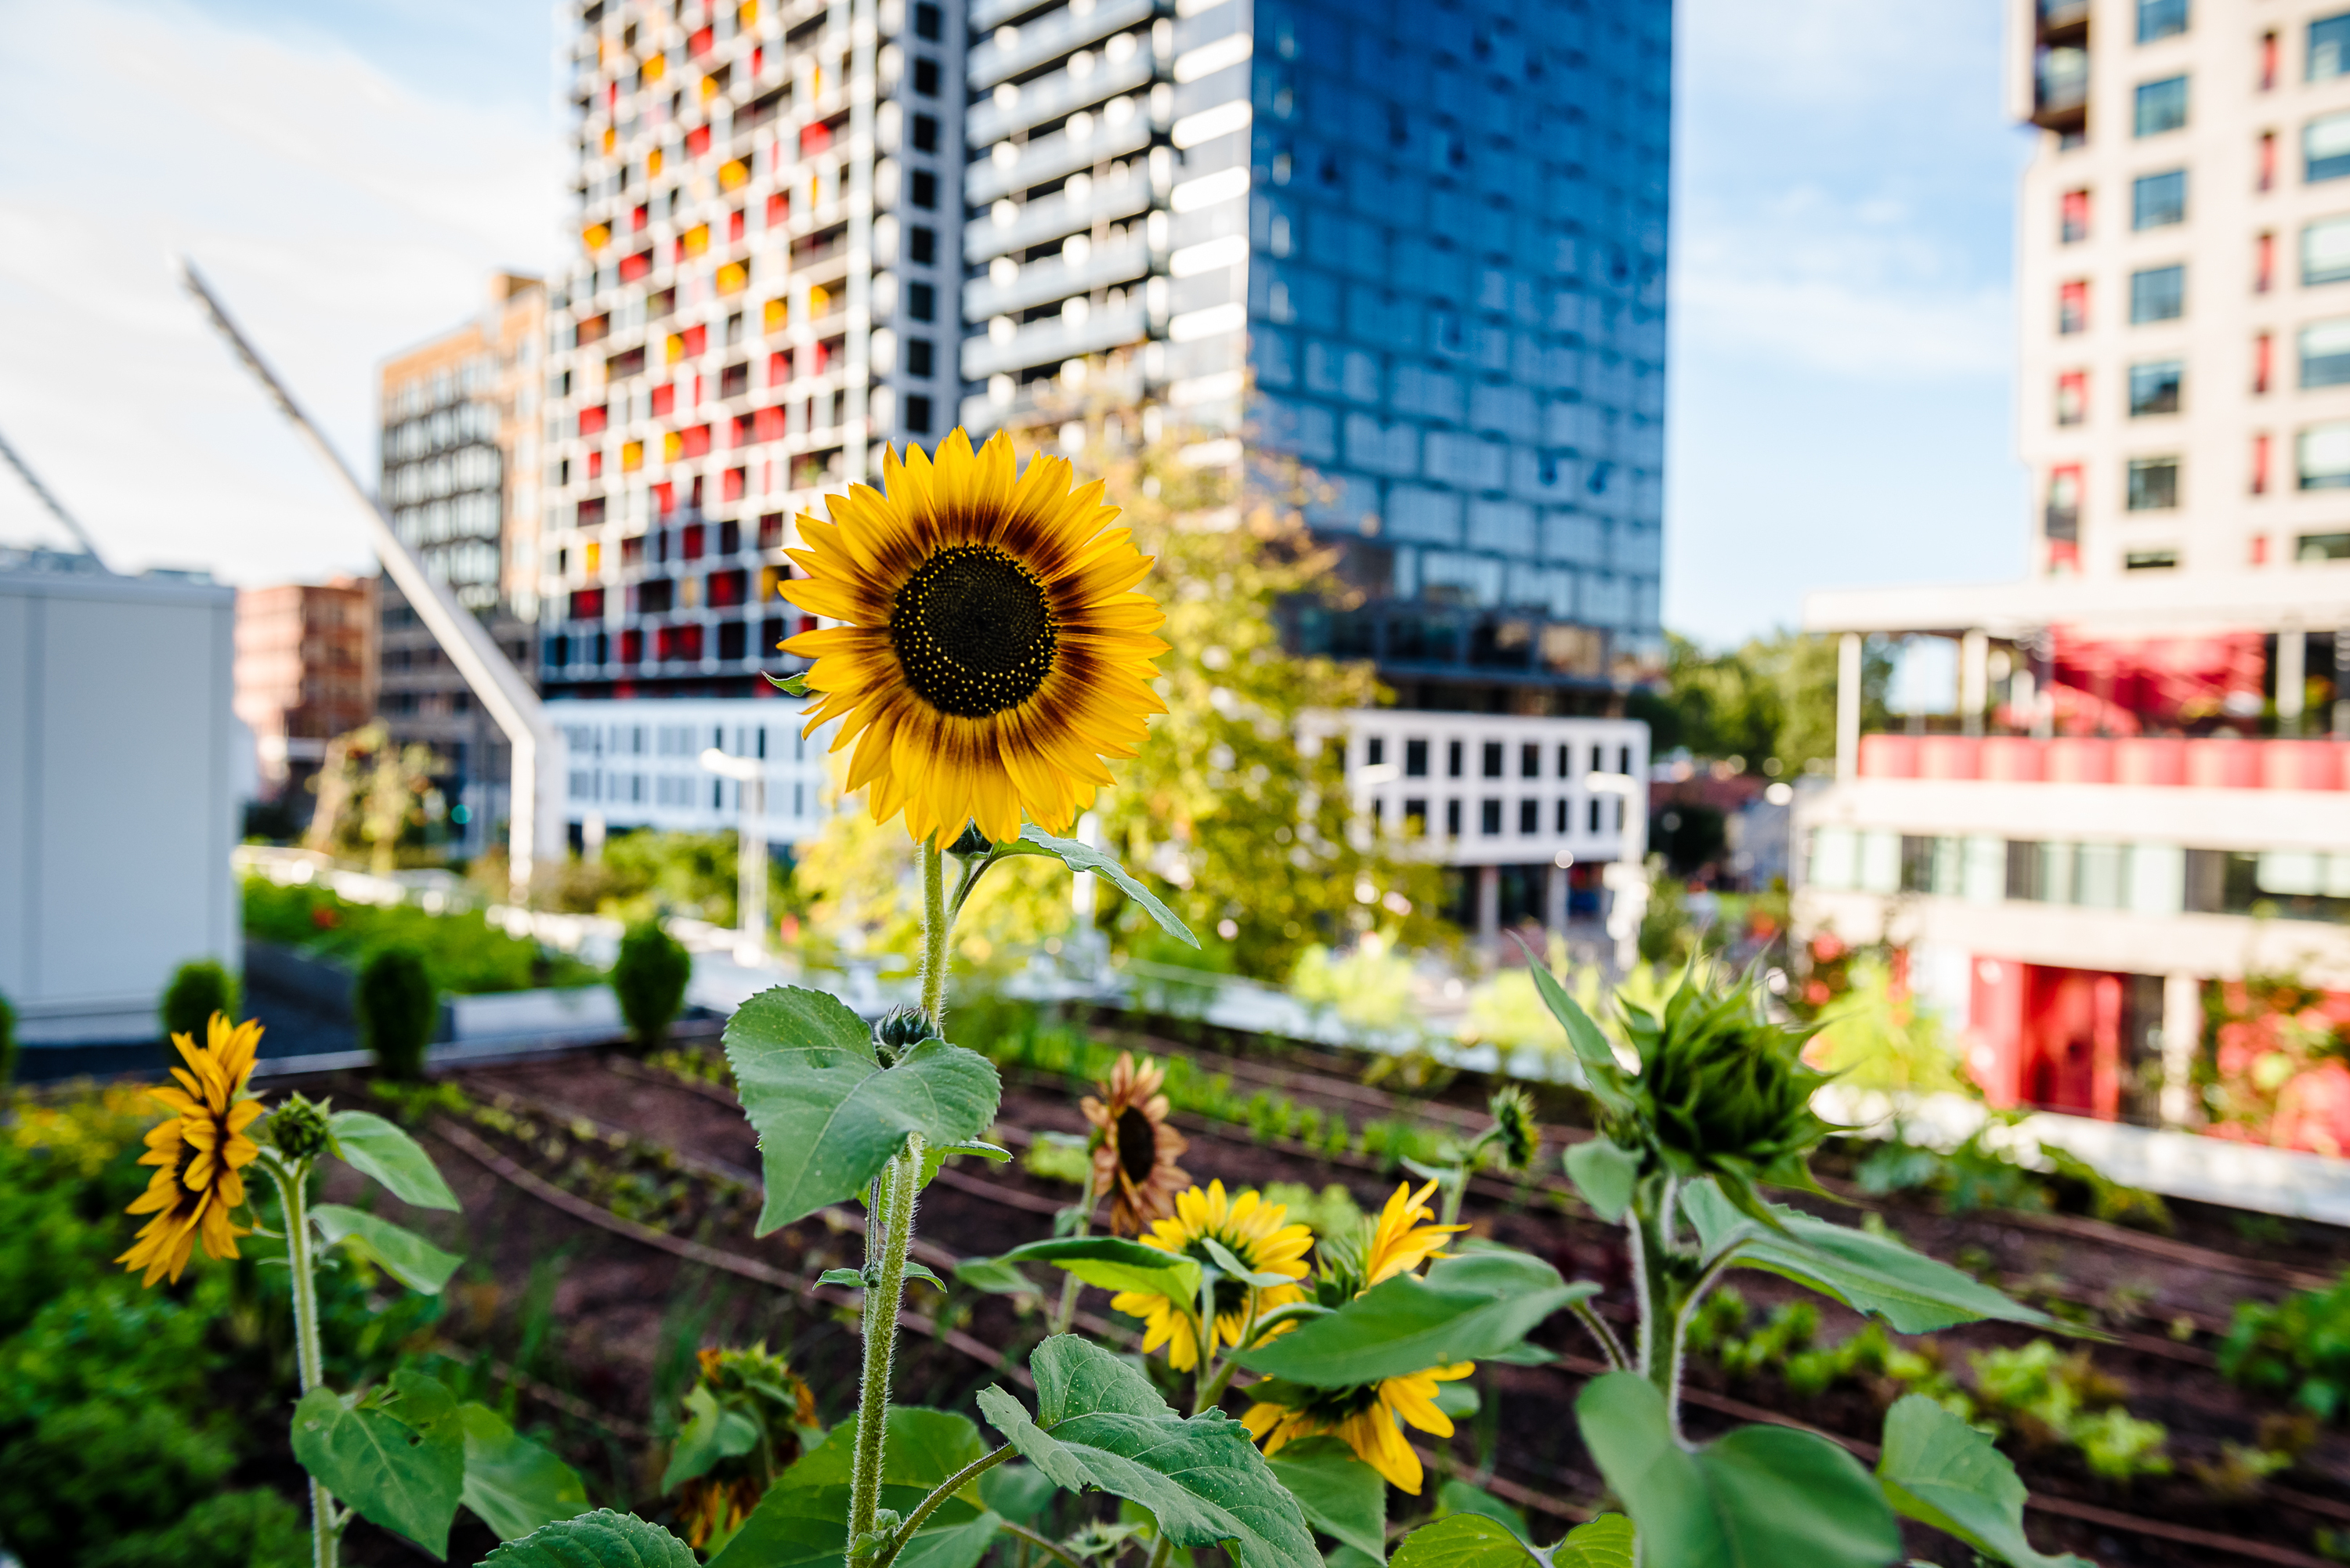 A new secret rooftop garden is open in downtown Montreal